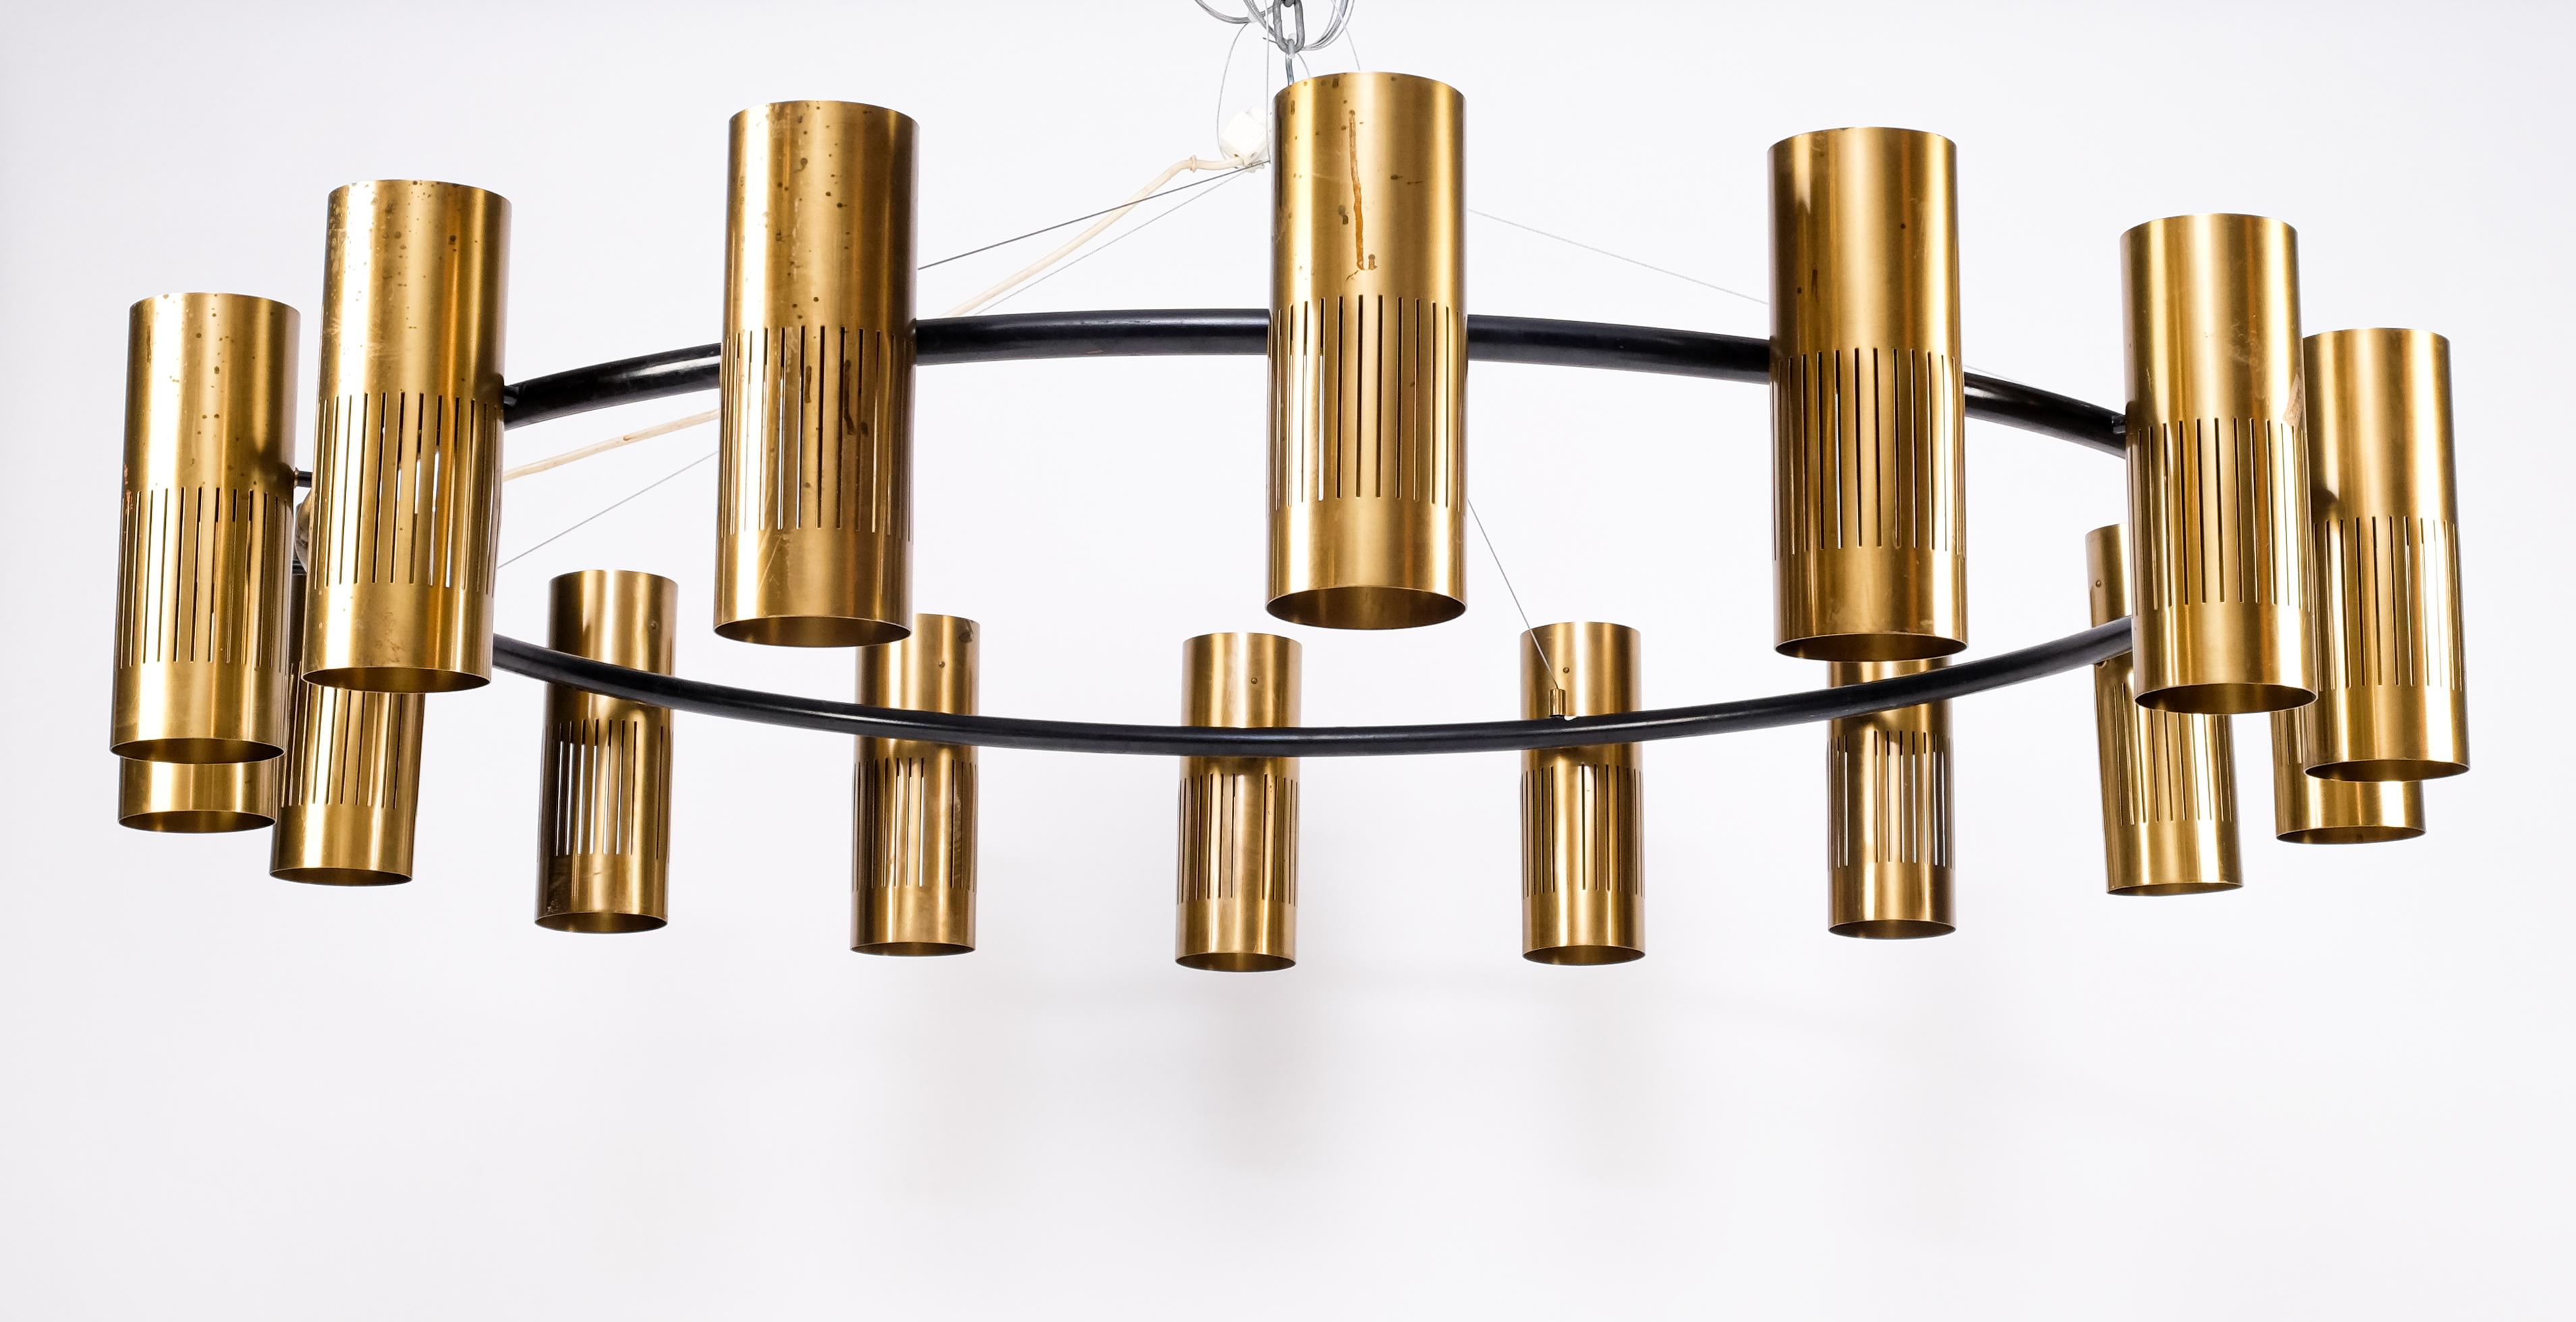 4 pieces available
Special made for a public villa in Sweden, 1959. True masterpiece, attributed to Böhlmarks.
Hanging in four thin steel wires that are adjustable according to your wishes of length.
Listed price is for one (1)